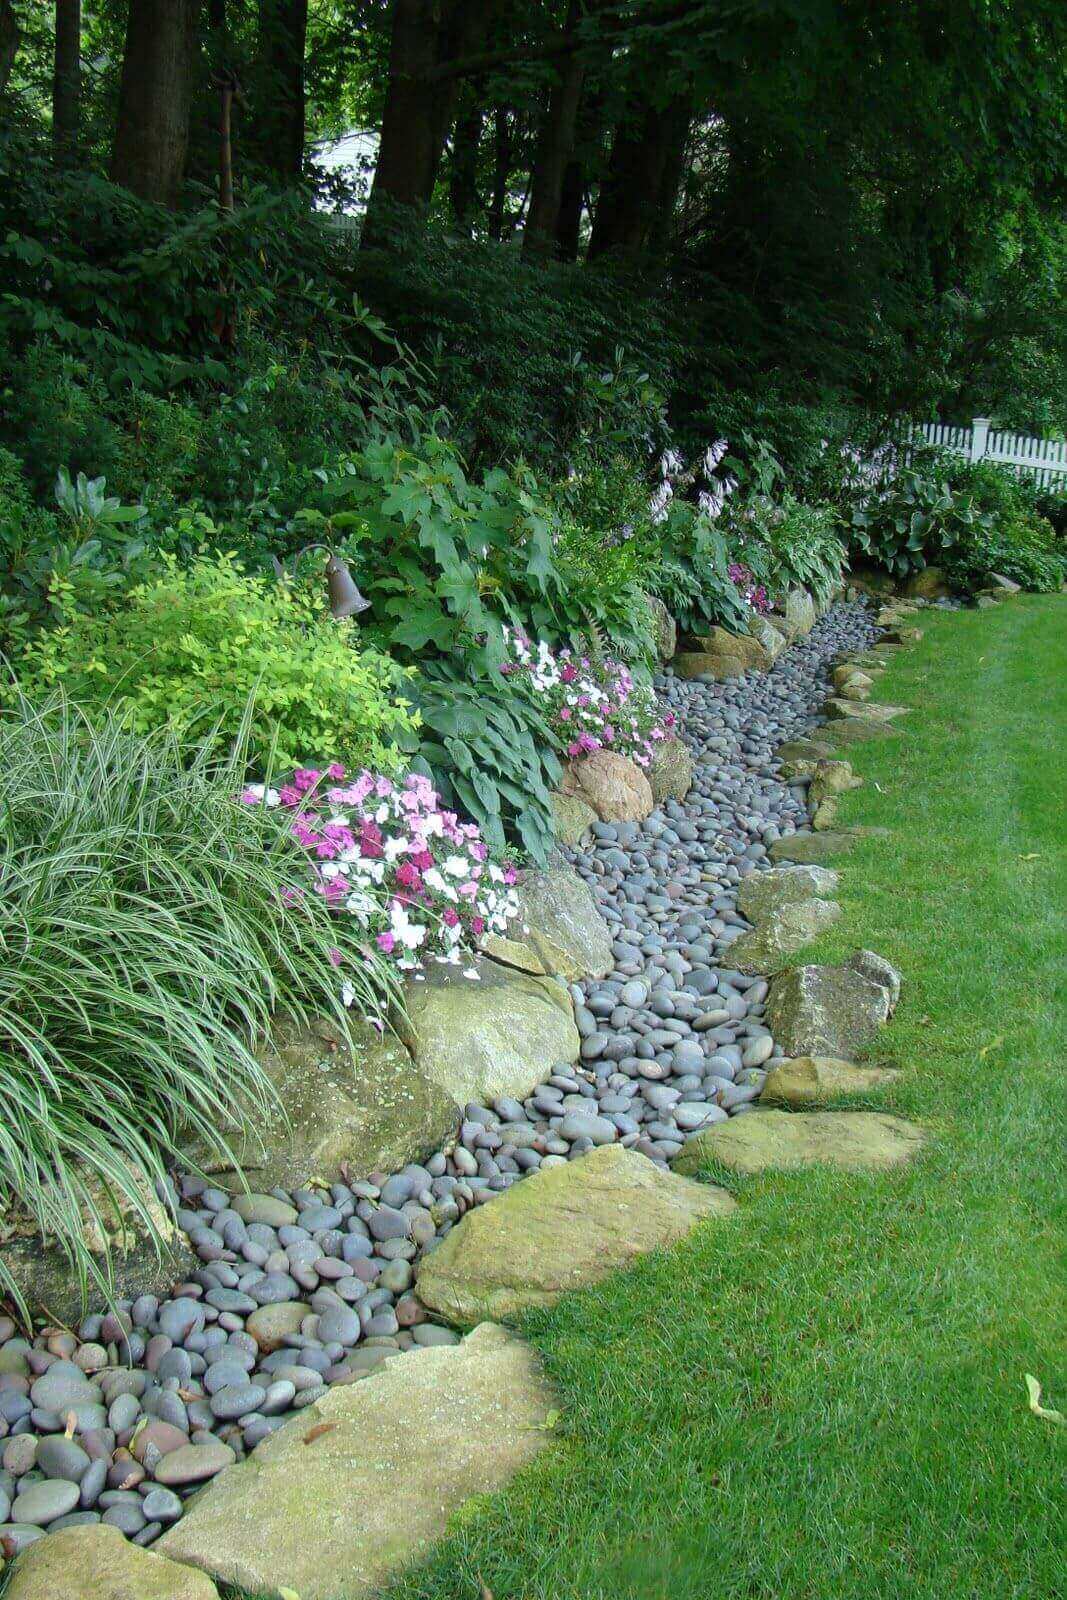 Lawn edging designs may sound like a boring topic, you will see there are some creative and interesting ideas you can put into practice to give a nicer look to your houseâ€™s landscape. For more ideas go to backyardmastery.com